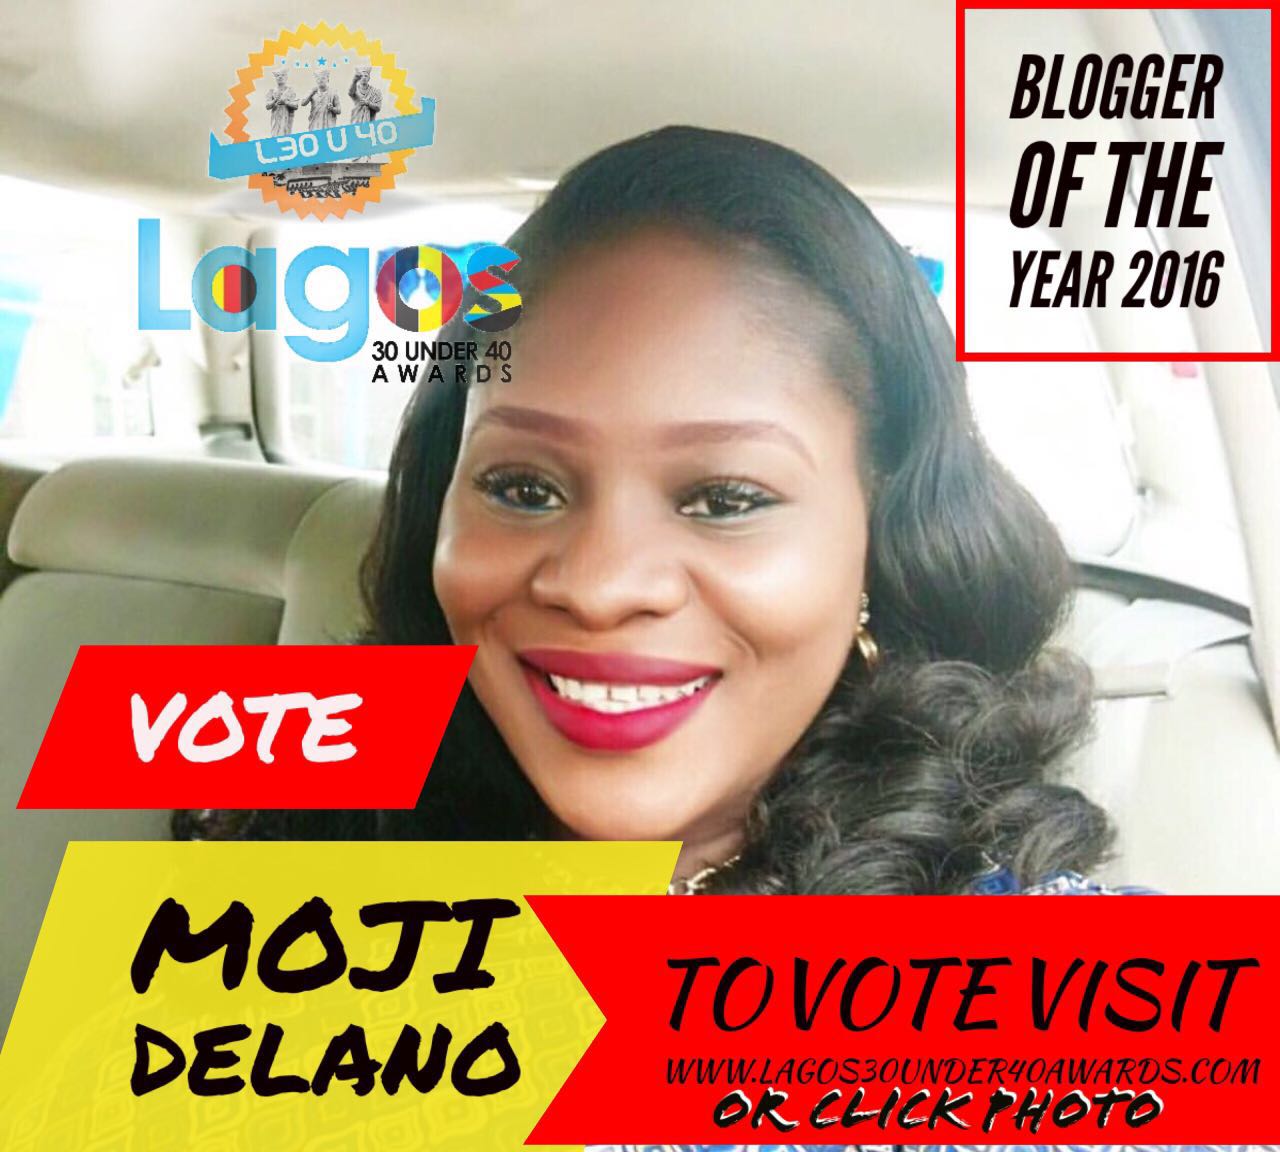 Moji Delano for Blogger of The Year-banner-300